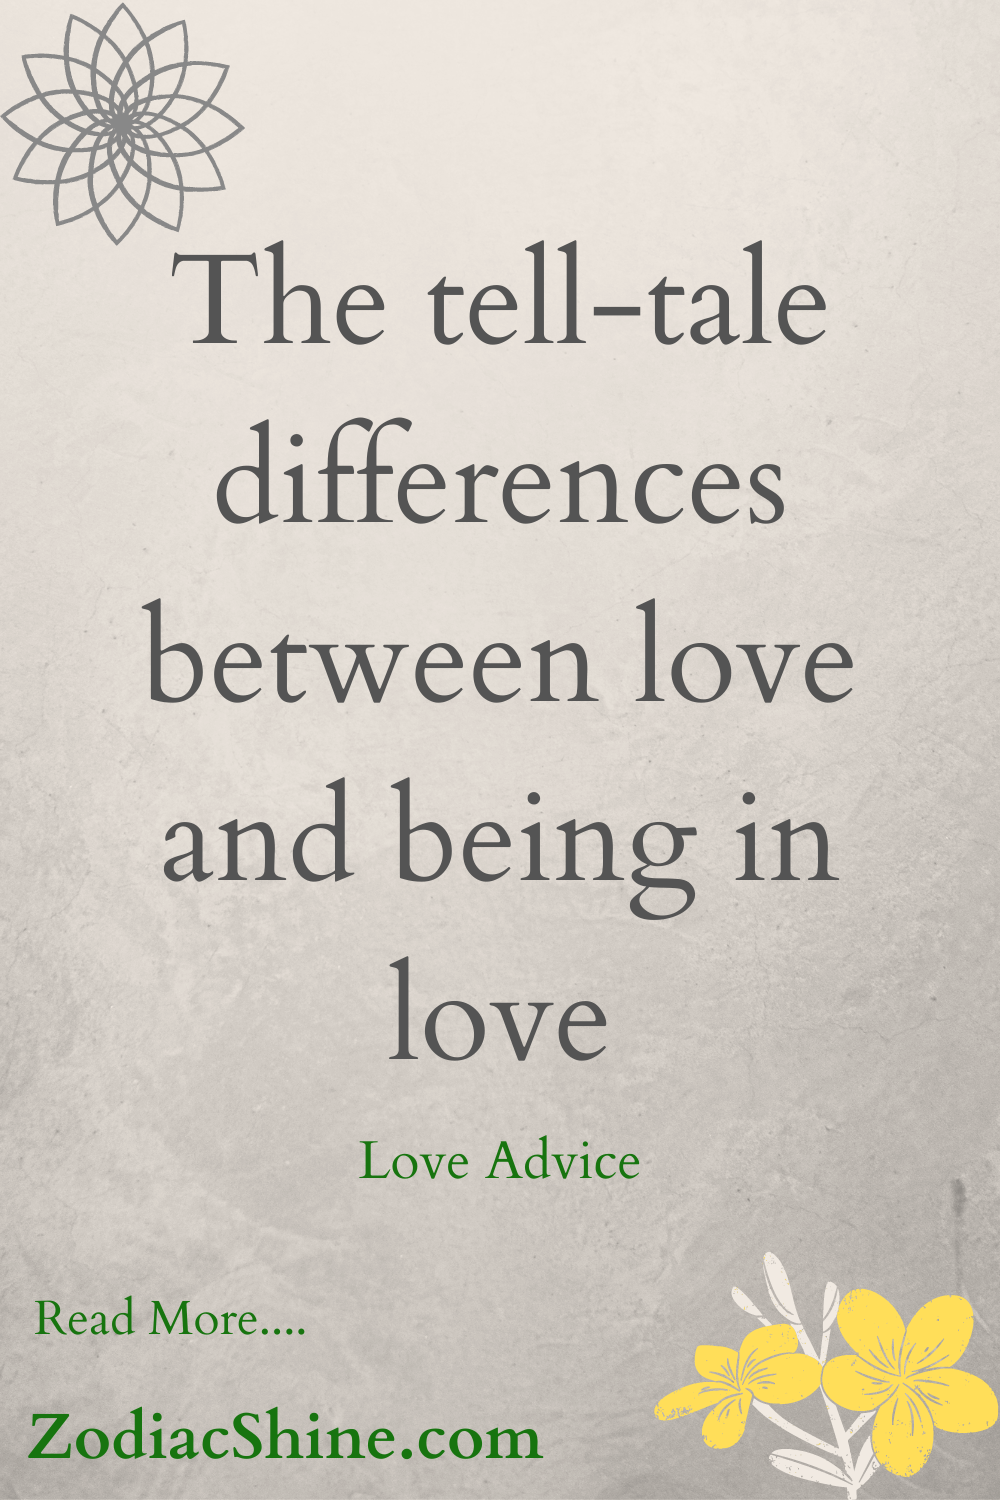 The tell-tale differences between love and being in love